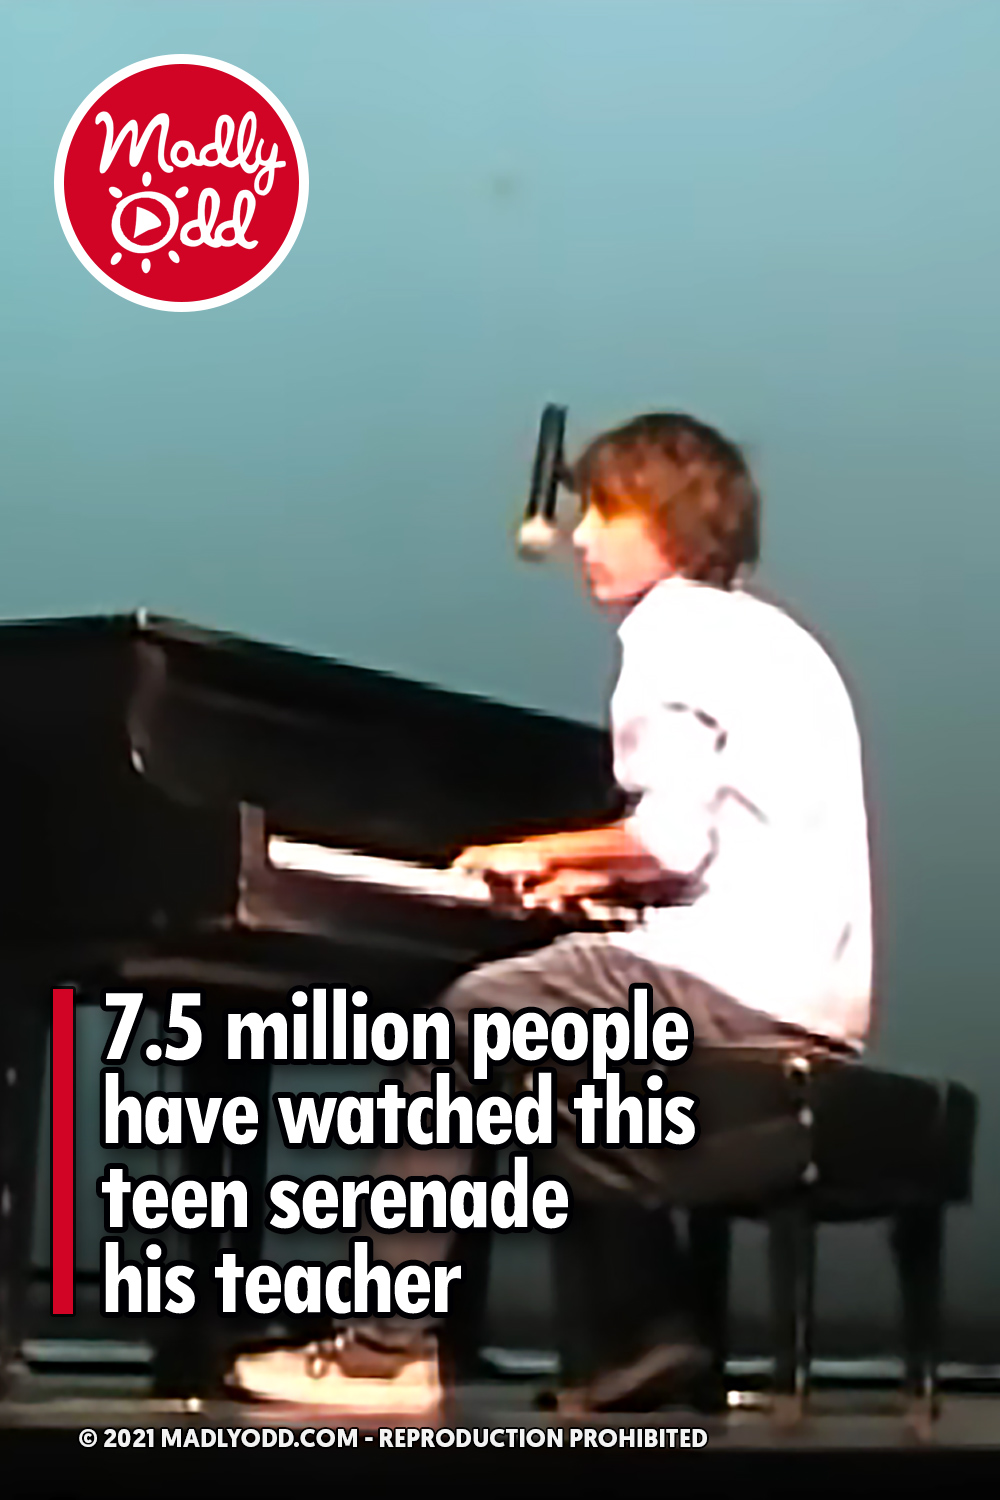 7.5 million people have watched this teen serenade his teacher